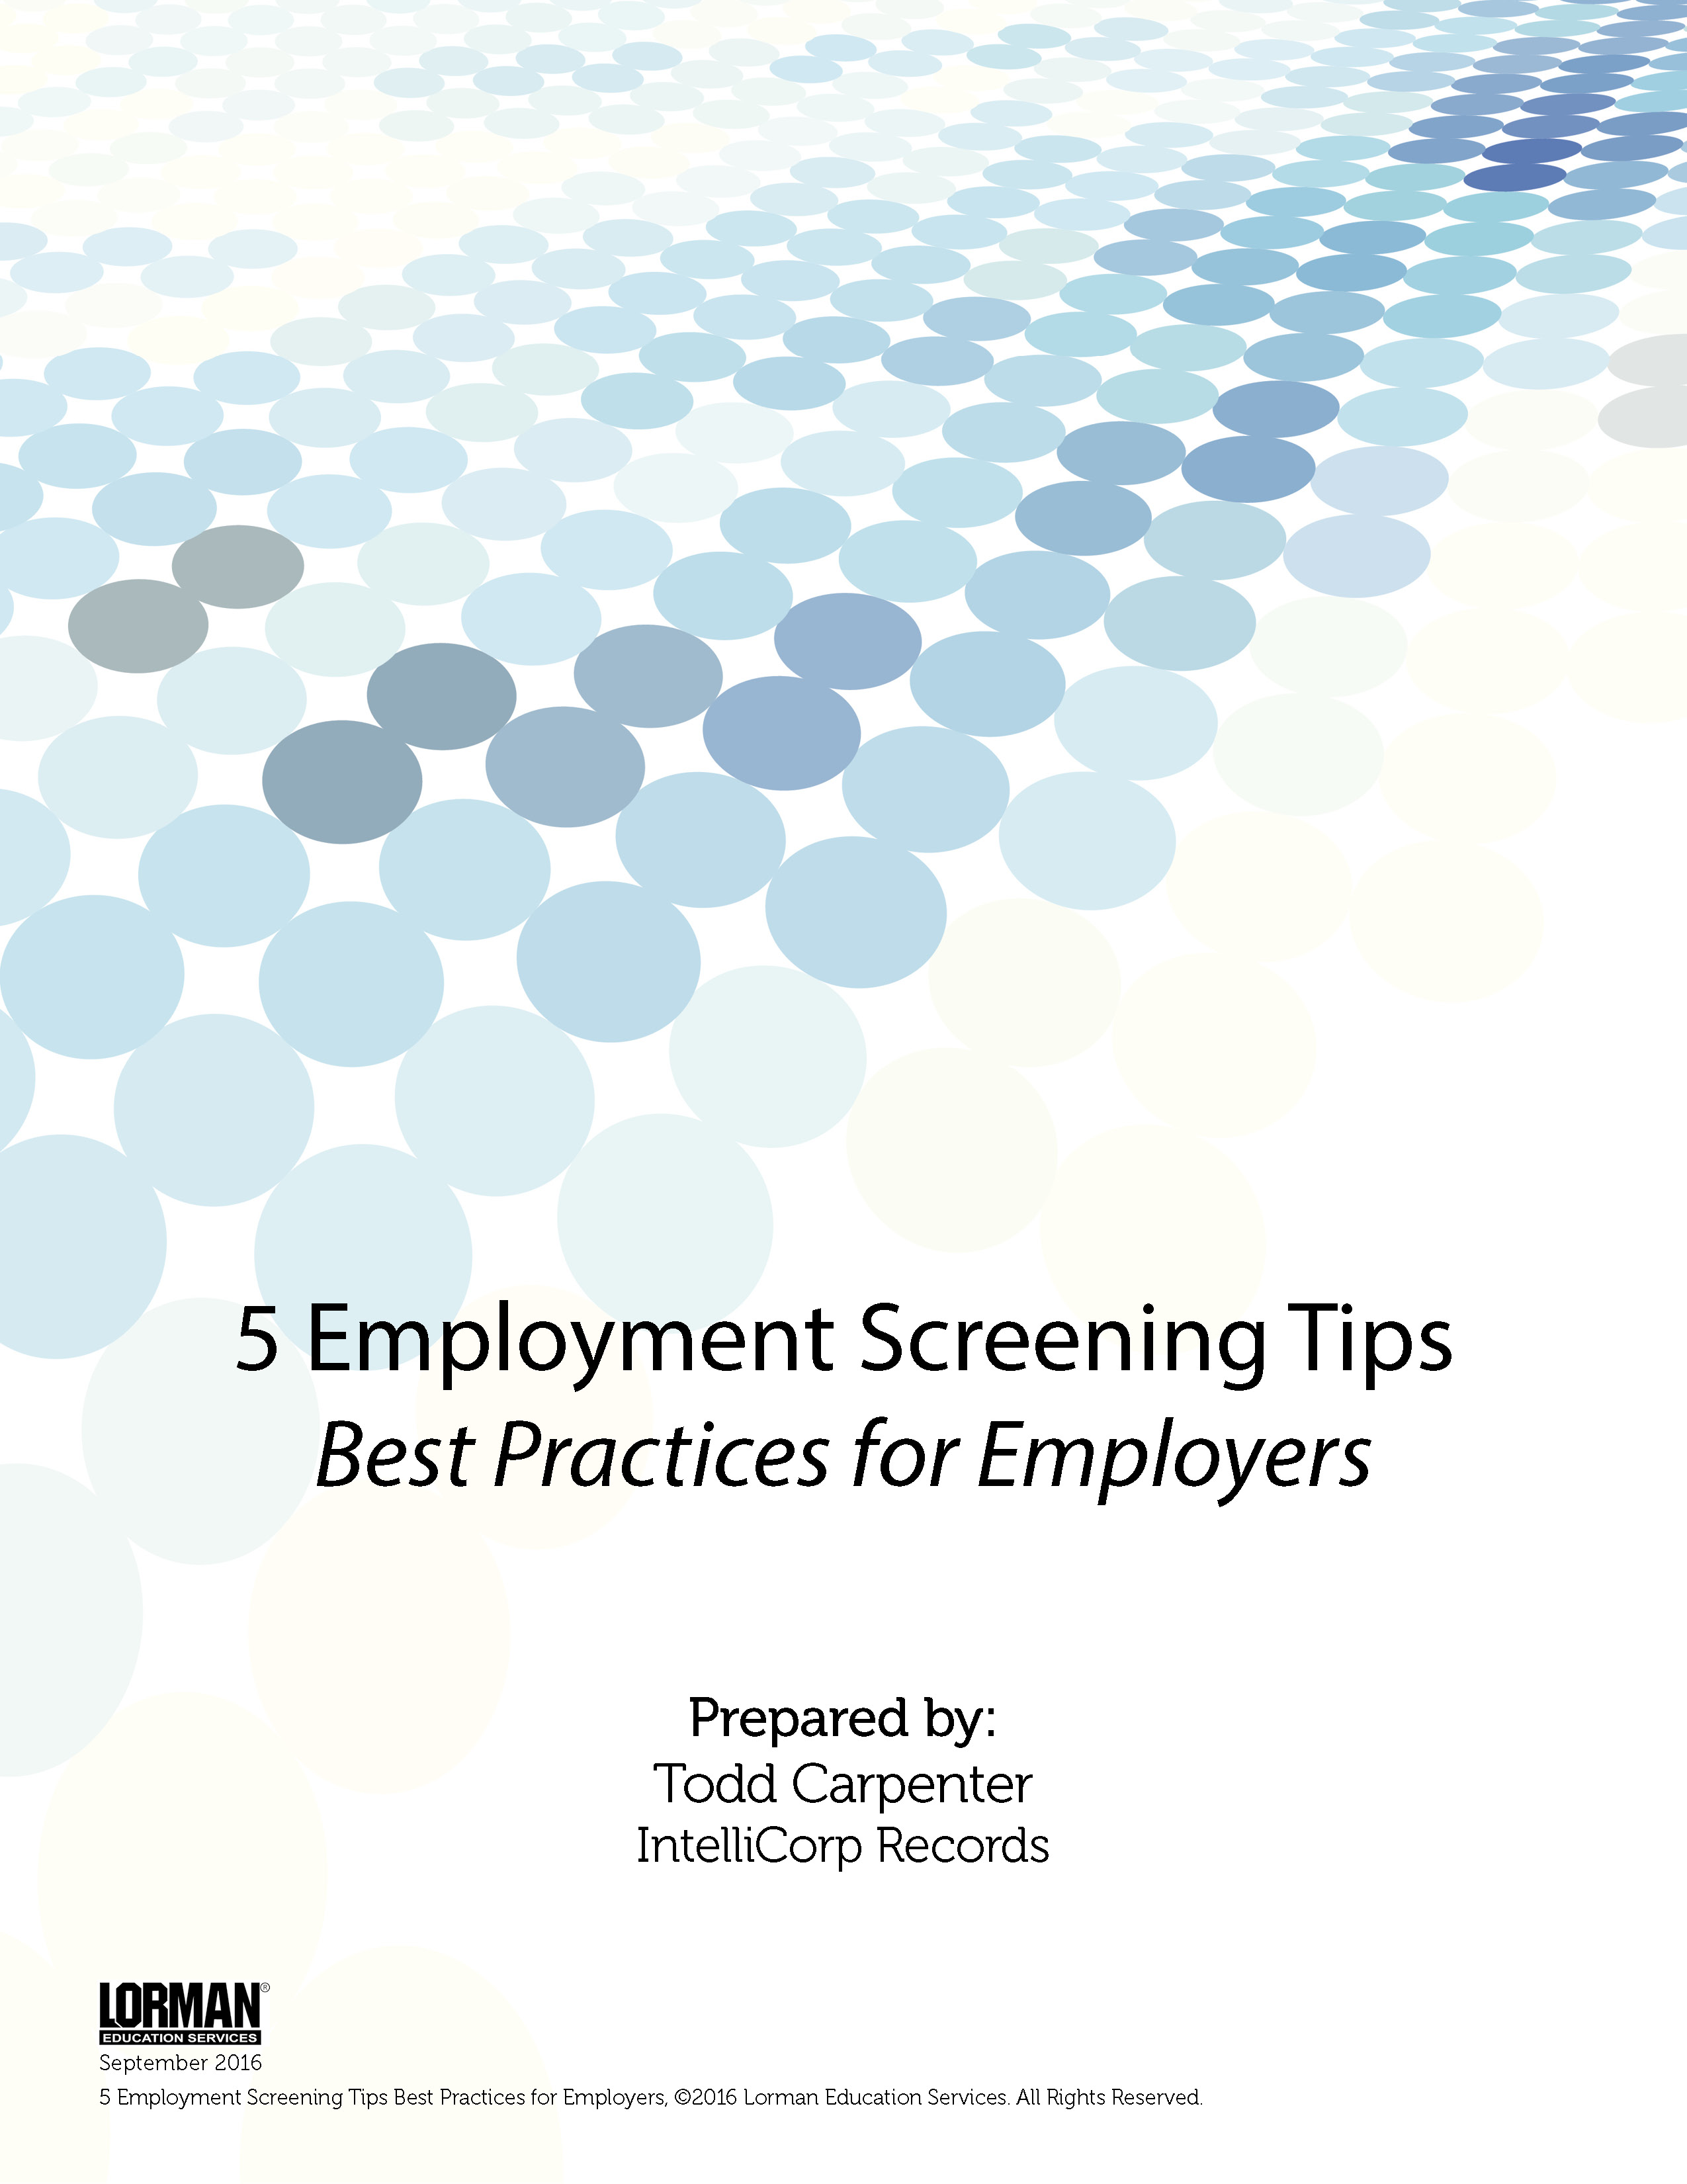 5 Employment Screening Tips - Best Practices for Employers